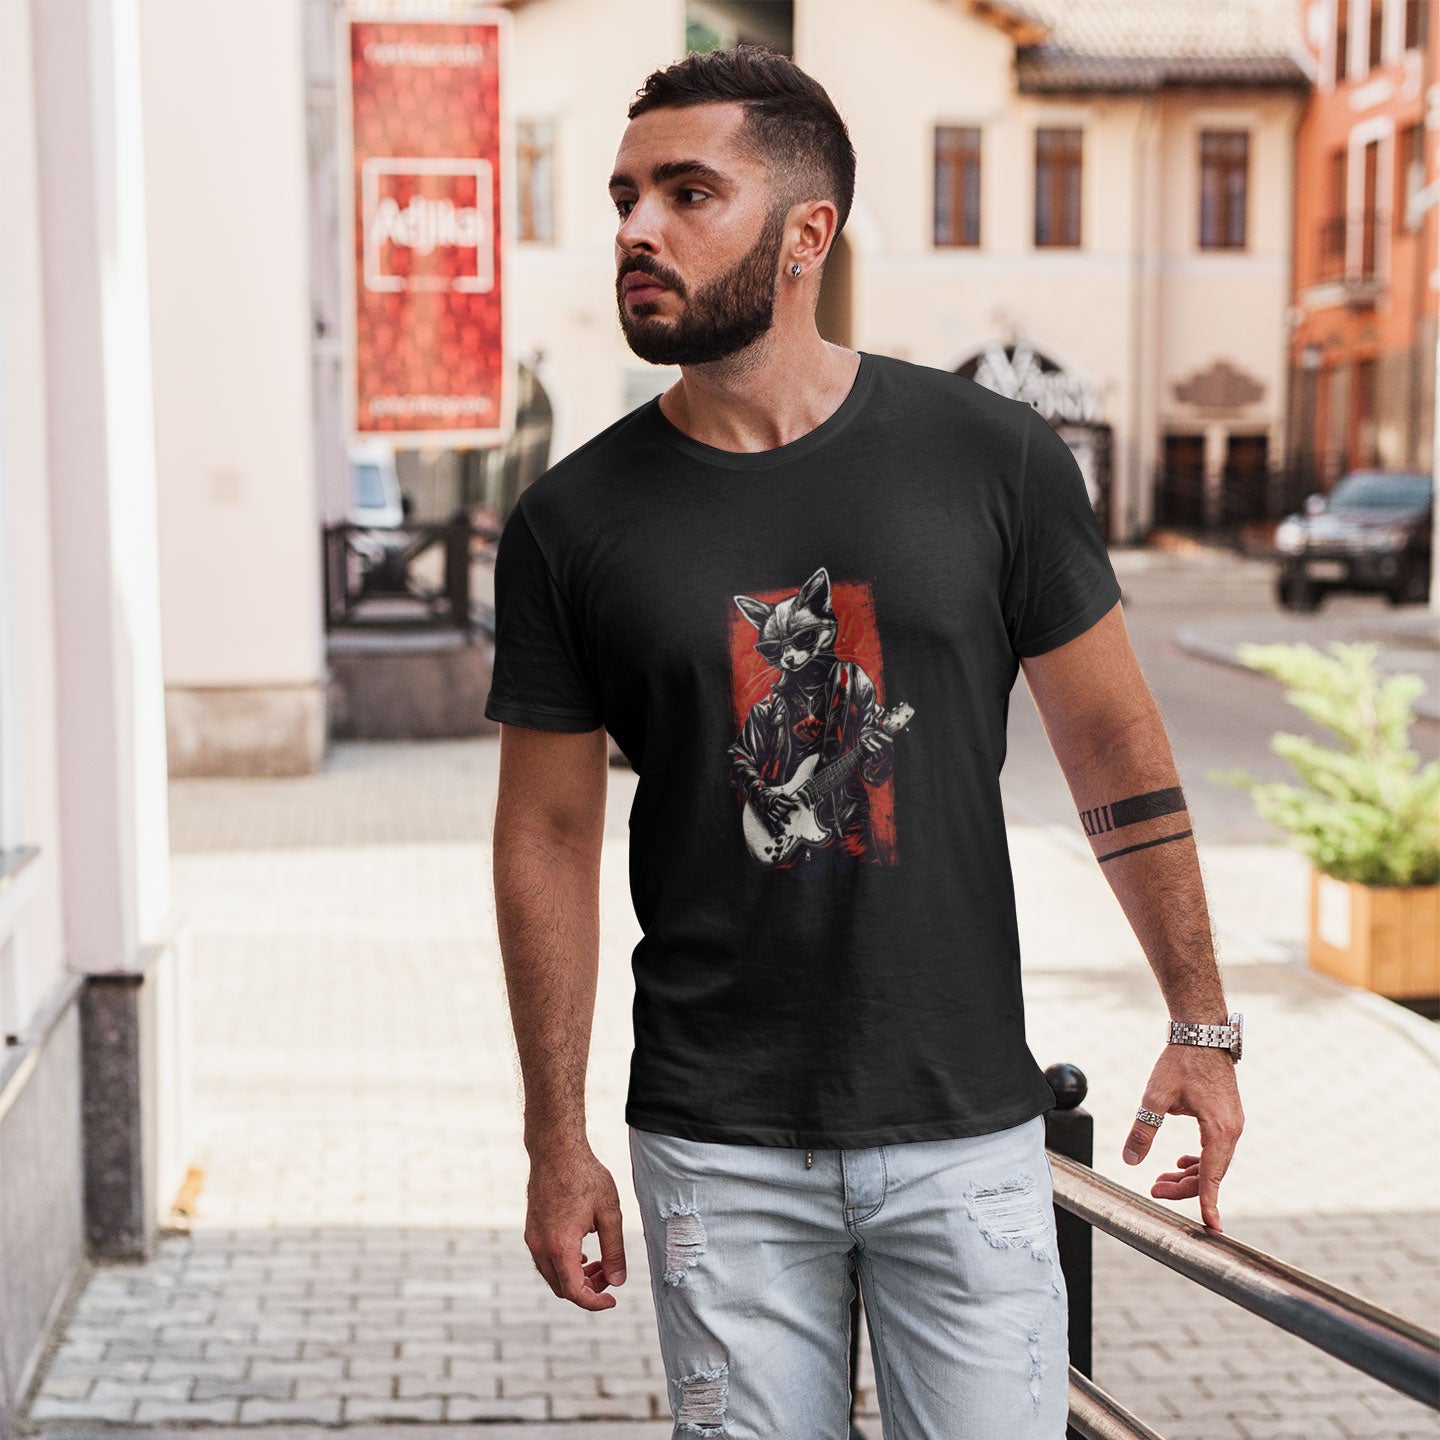 guy wearing a black t-shirt with a cool fox playing bass guitar print